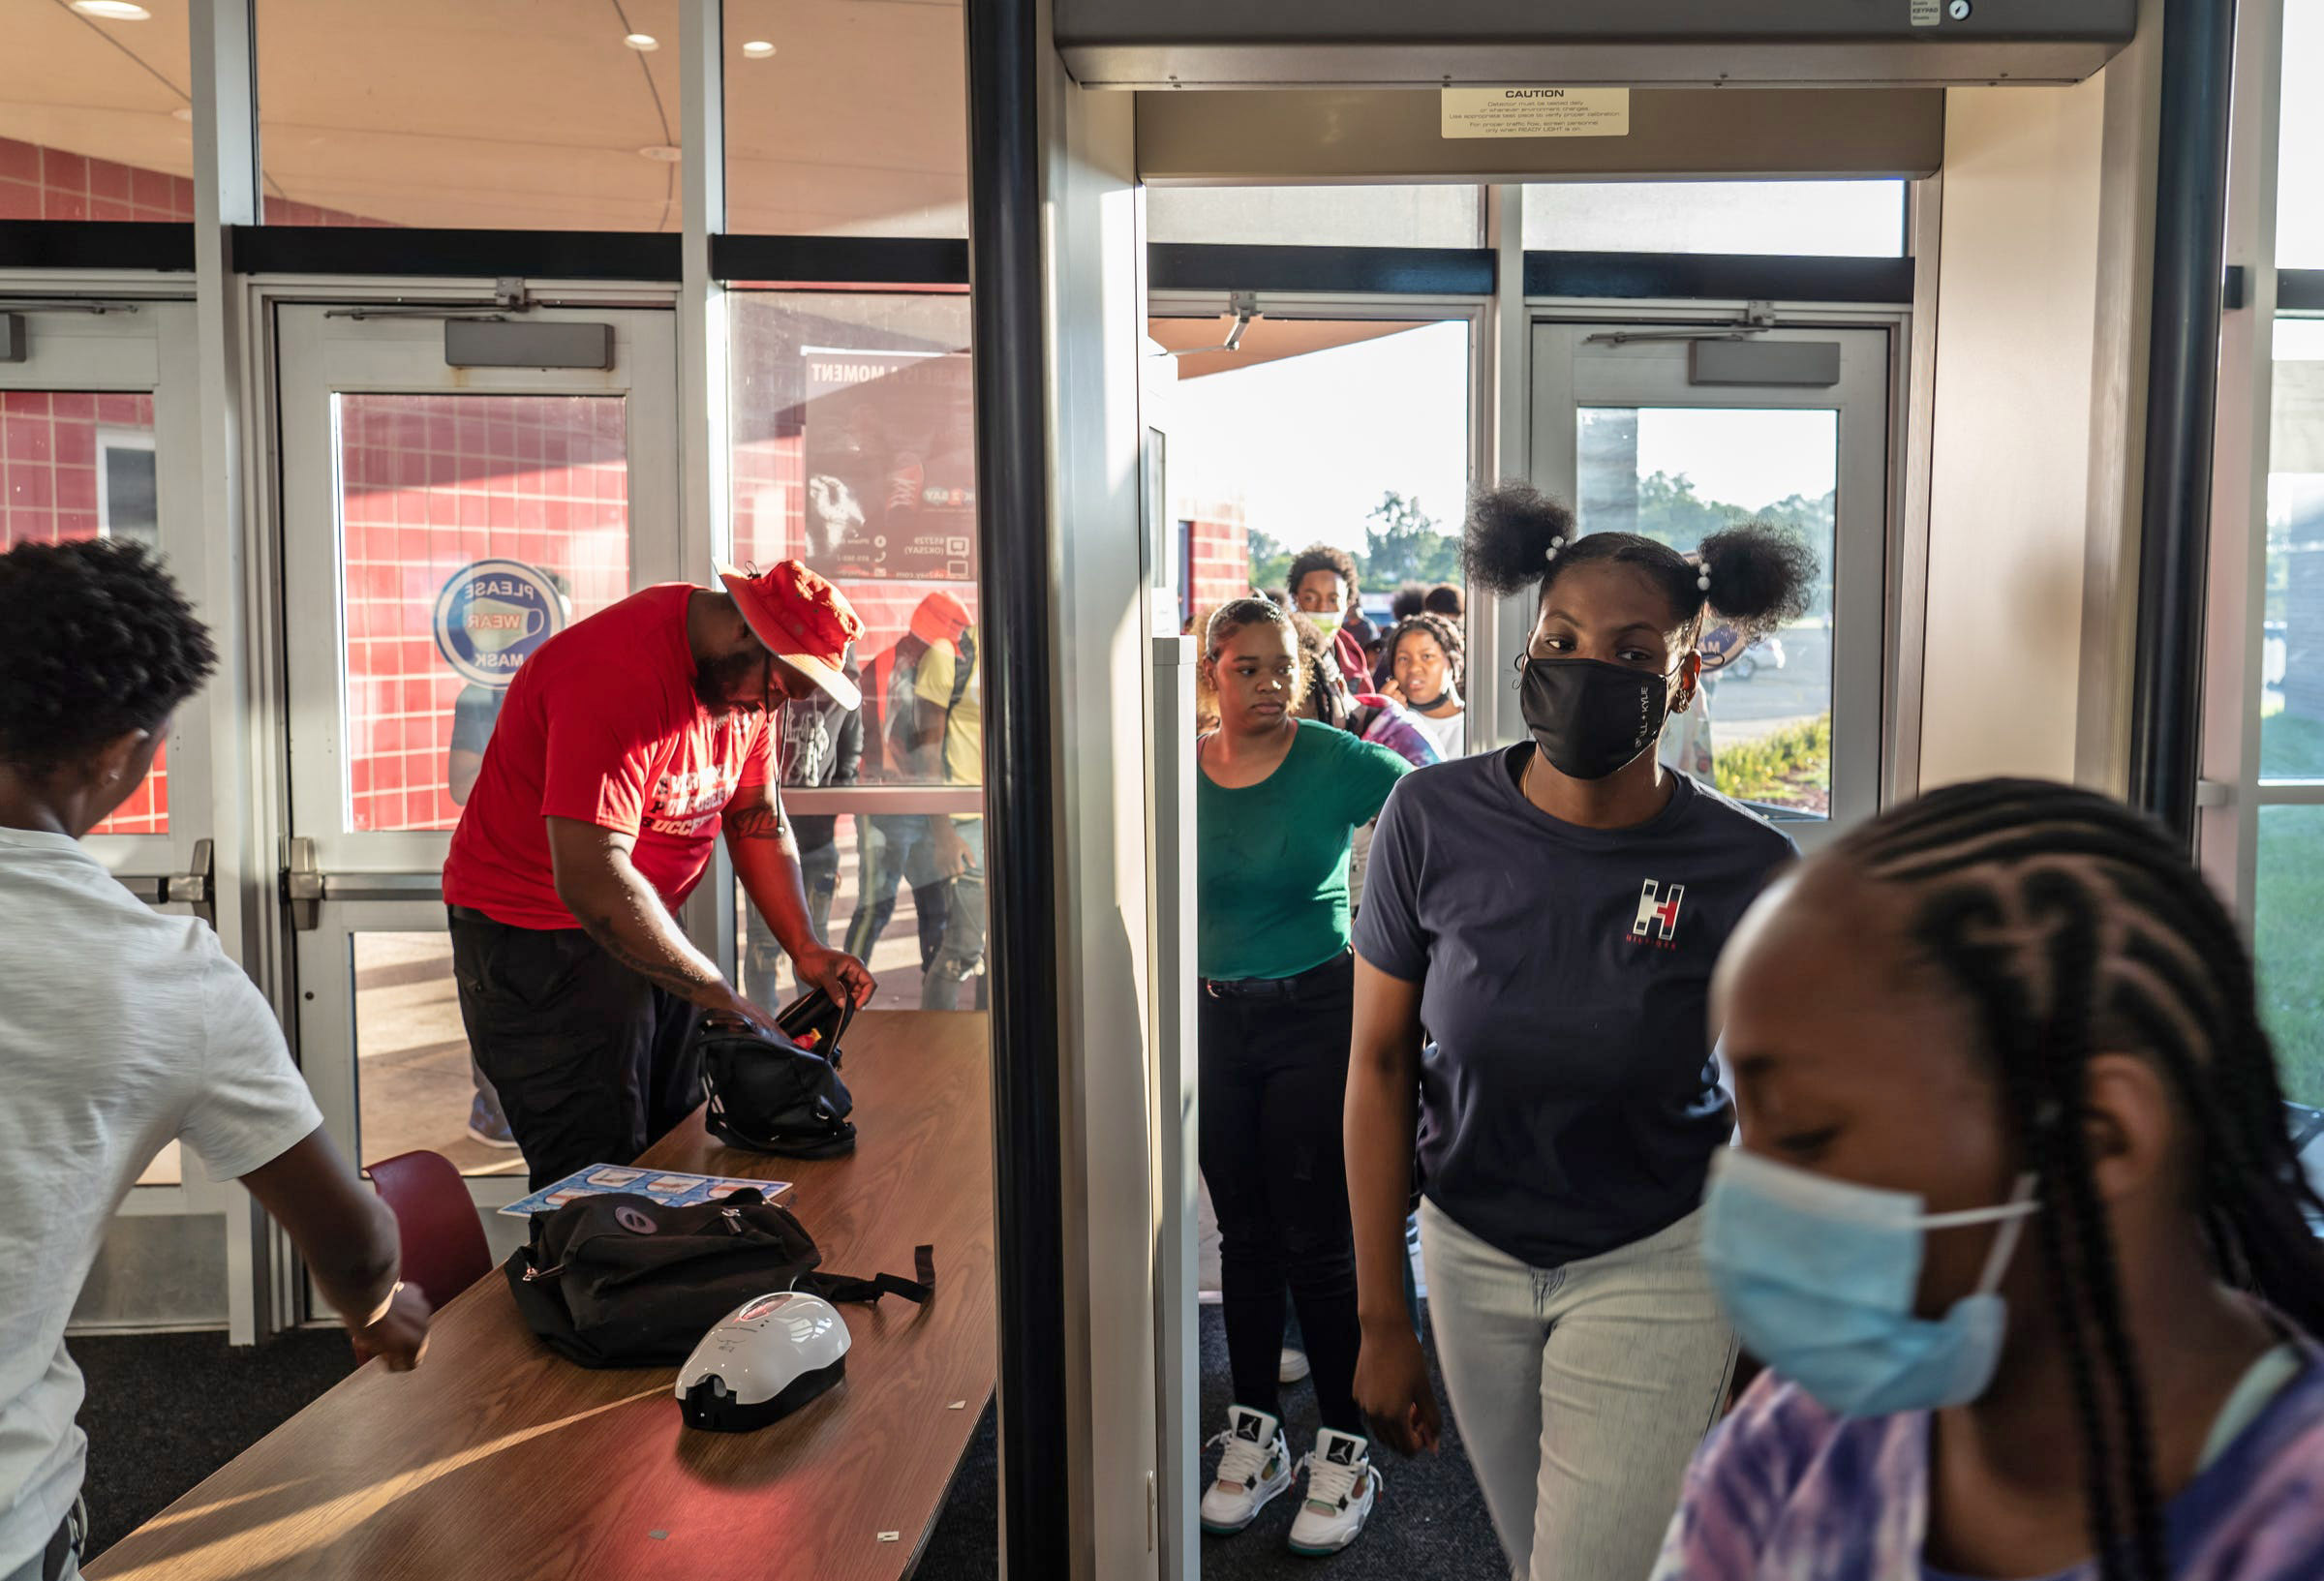 PHOTO: Ecorse High School students go through security search and pass through a metal detector during the first day of school at Ecorse High School in Ecorse on Tuesday, September 7, 2021.